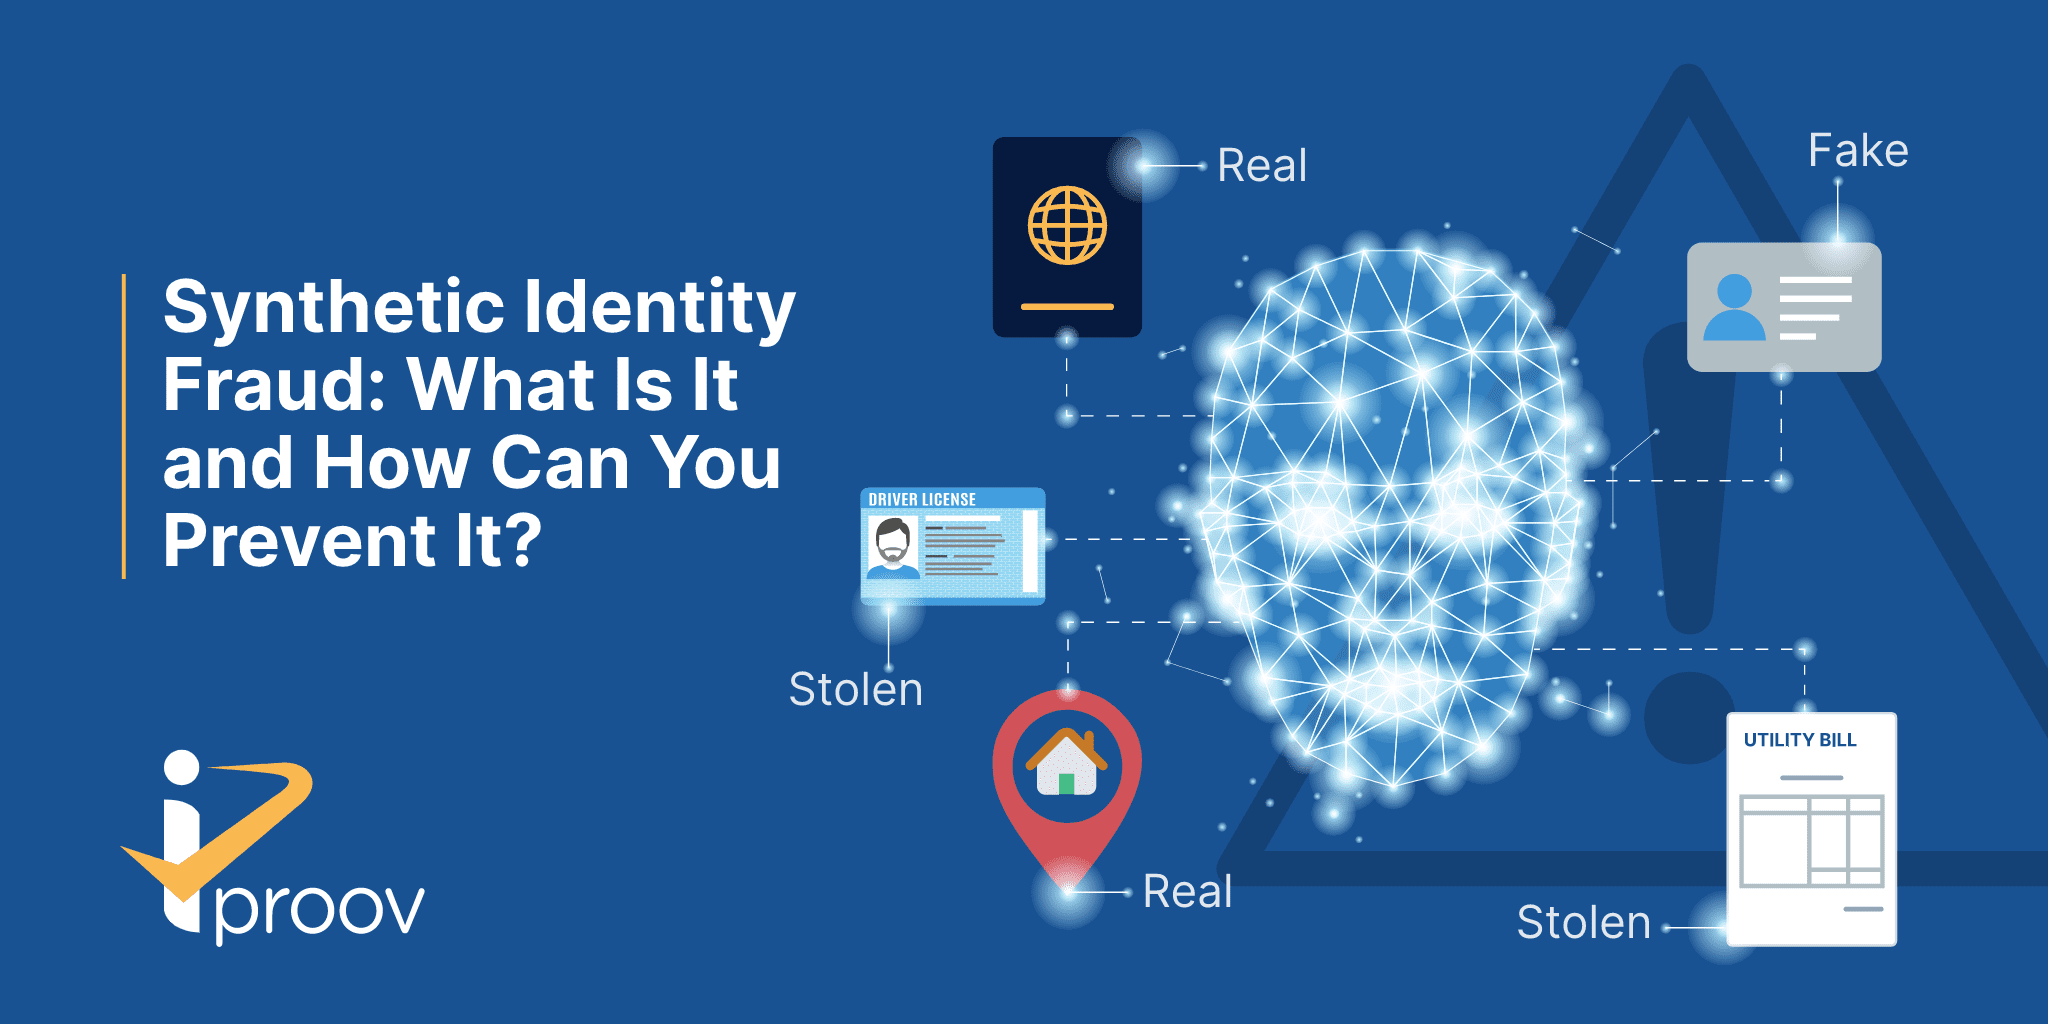 Synthetic Identity Fraud - what is it? how does it work? How can biometric liveness technology defend against it?